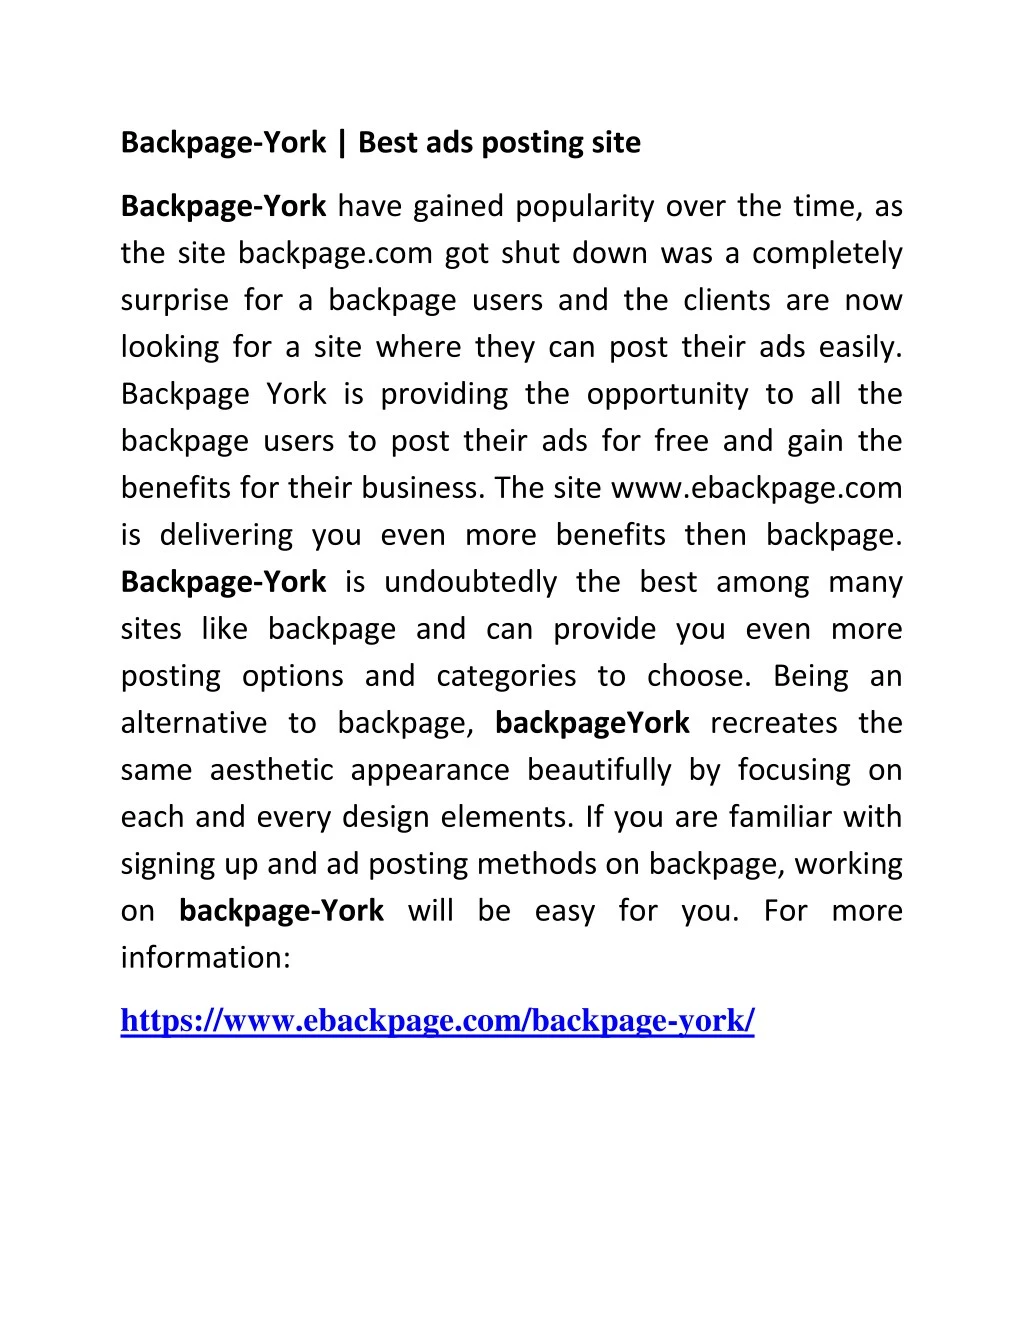 backpage york best ads posting site